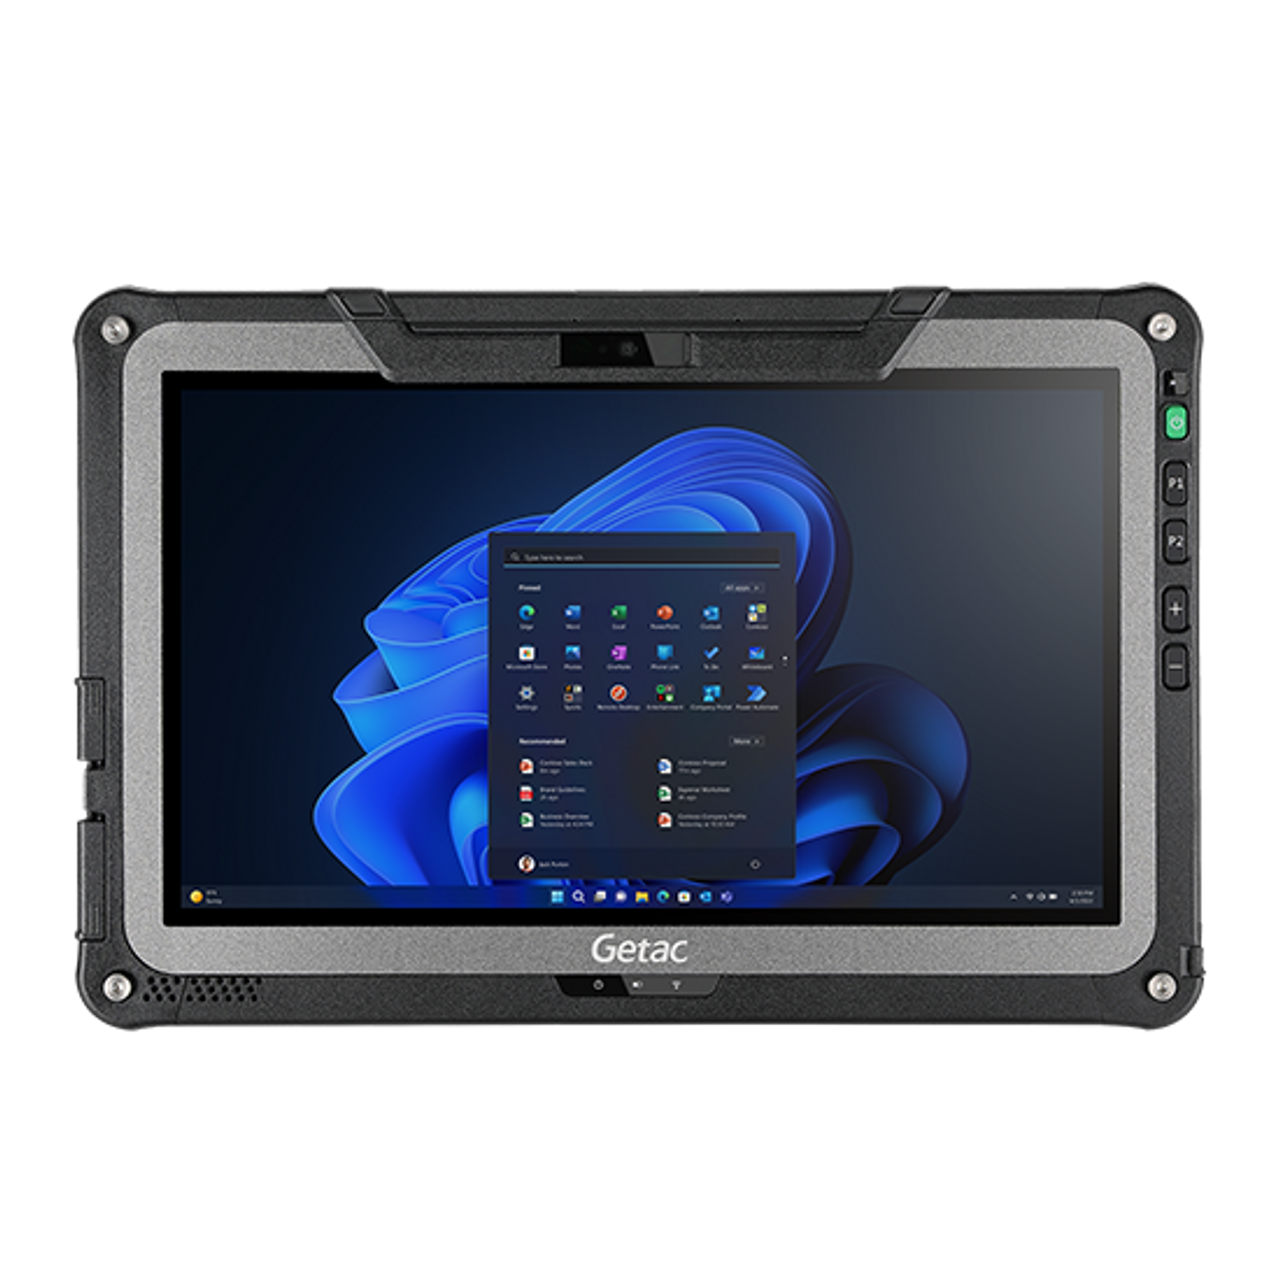 Getac F110 G6 TAA i5-1145G7 vPro , 11.6inch (Without Webcam), W 10 Pro x64 with 8GB RAM + TAA, 256GB PCIe SSD, SR (Full HD LCD+ Touchscreen+Hard Tip stylus), US Power Cord, (Without Rear Camera), WiFi + BT, Scrdr, 3yb2b